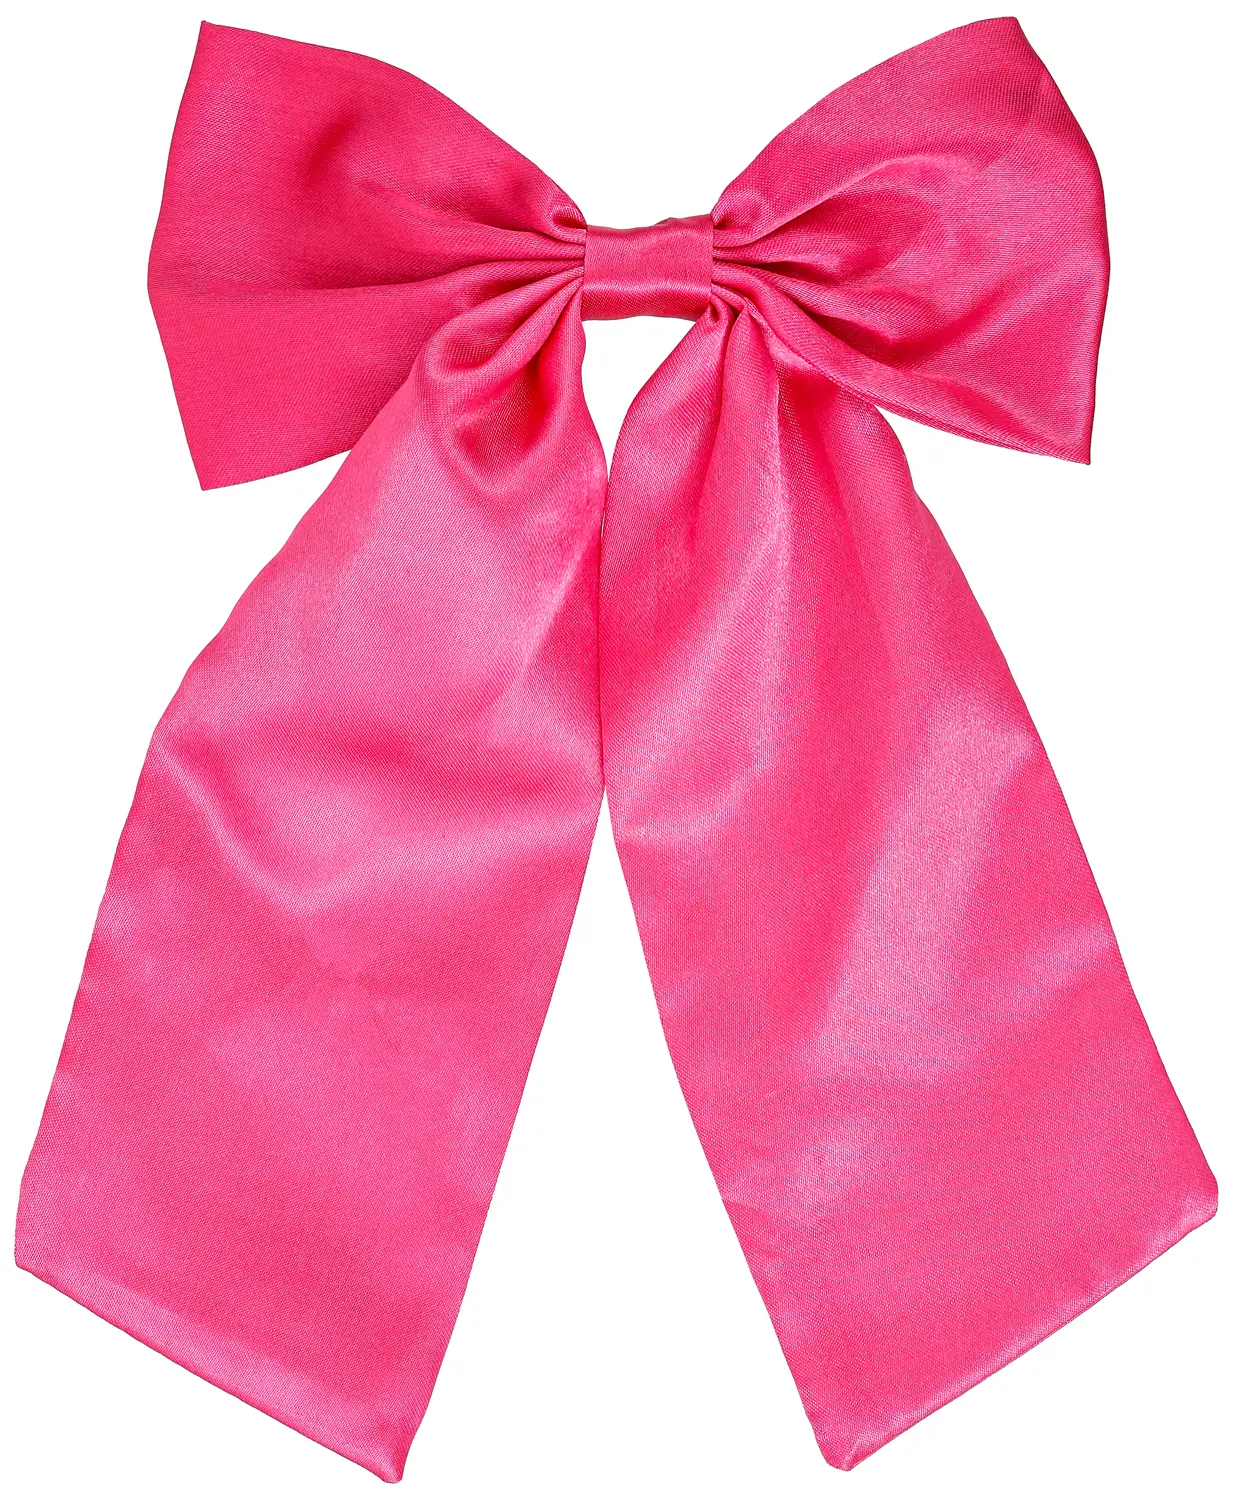 Barrette - Pink Bow